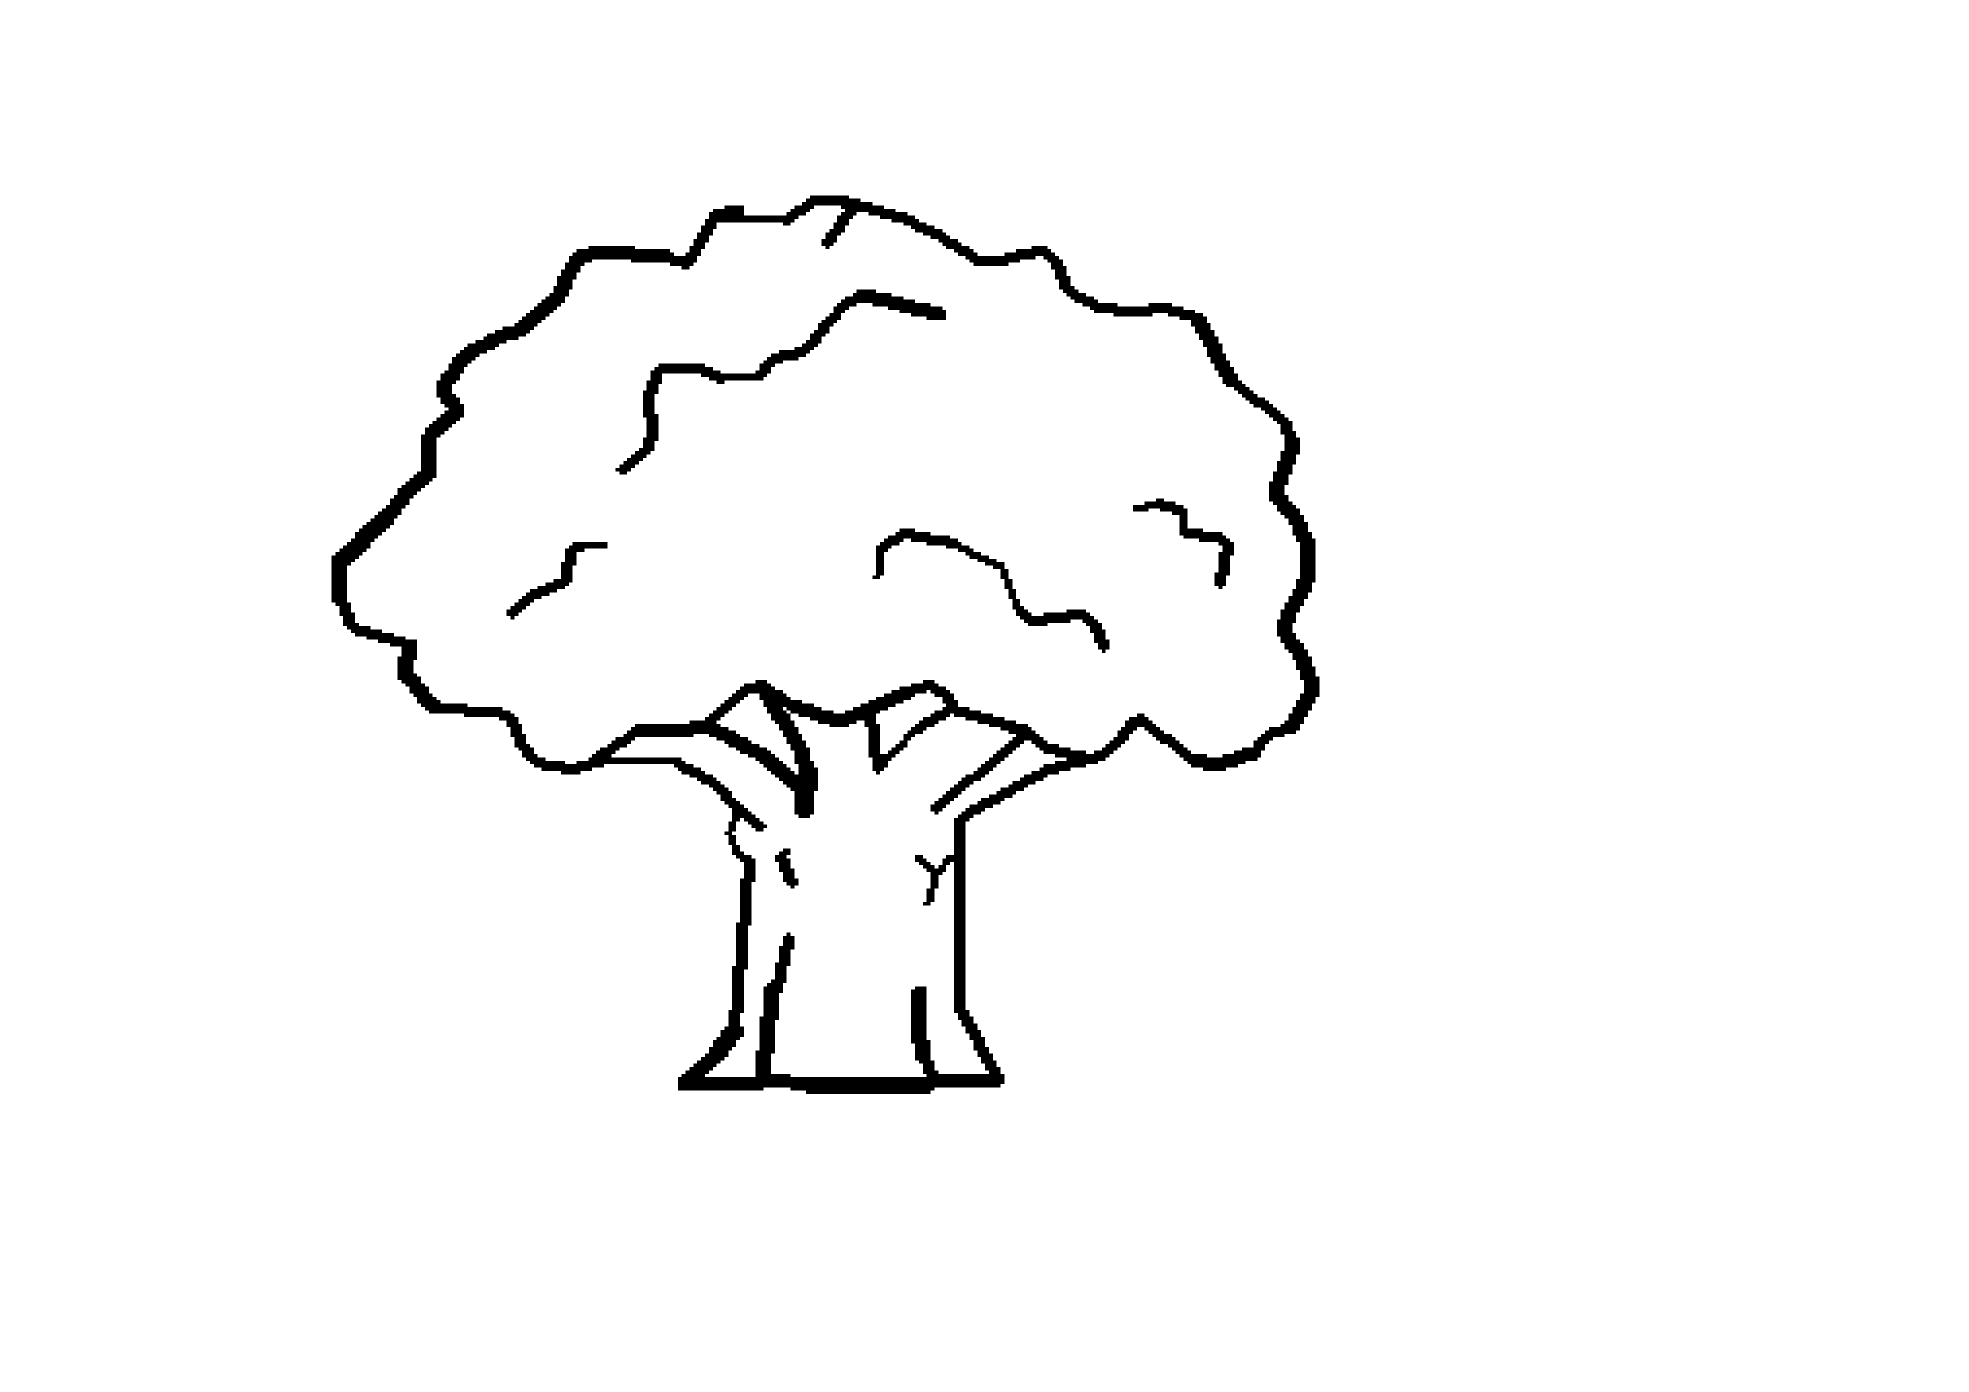 Free Tree Drawings Black And White, Download Free Tree Drawings Black